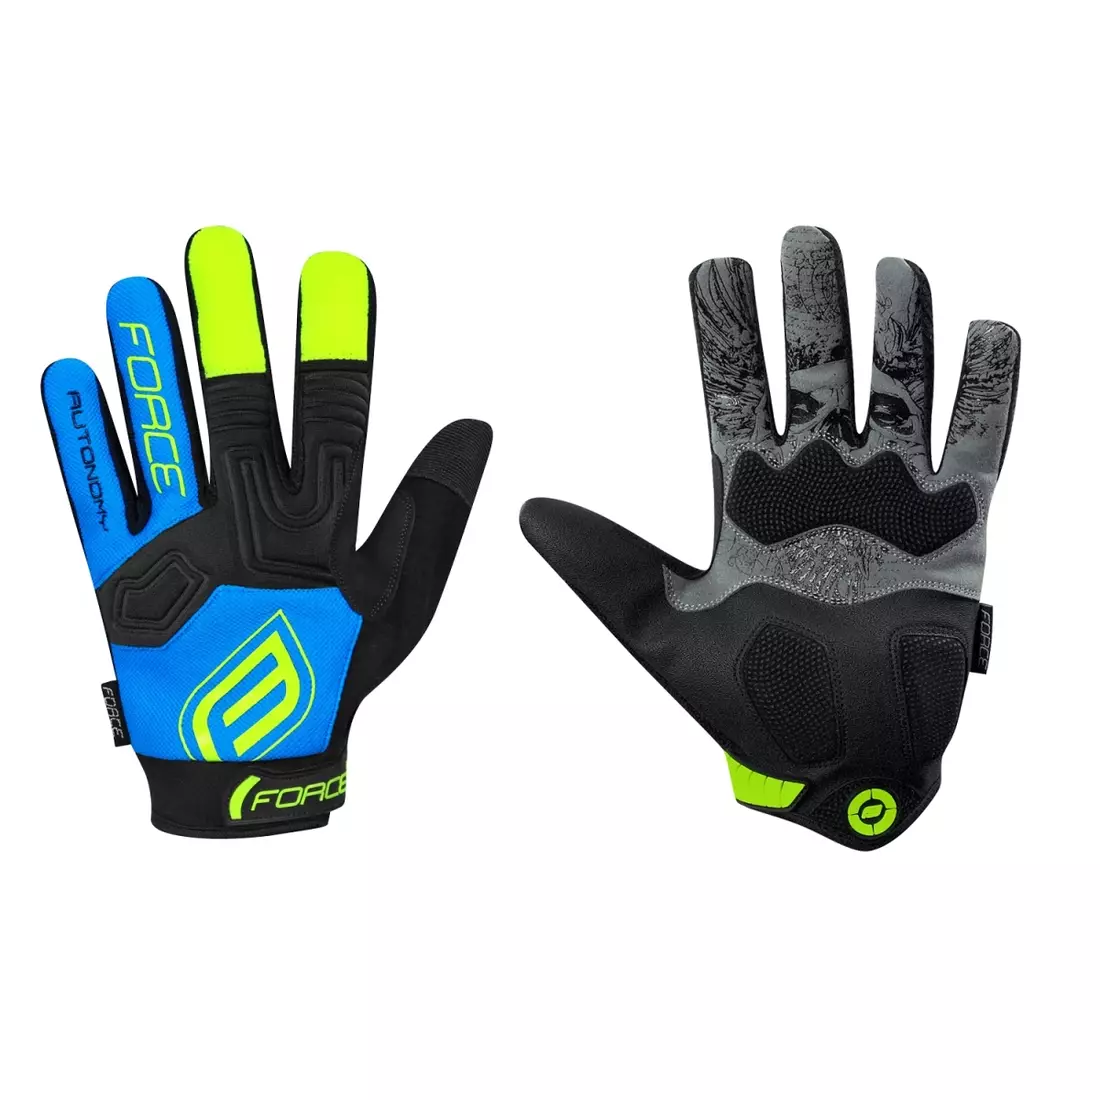 FORCE MTB AUTONOMY cycling gloves black and blue